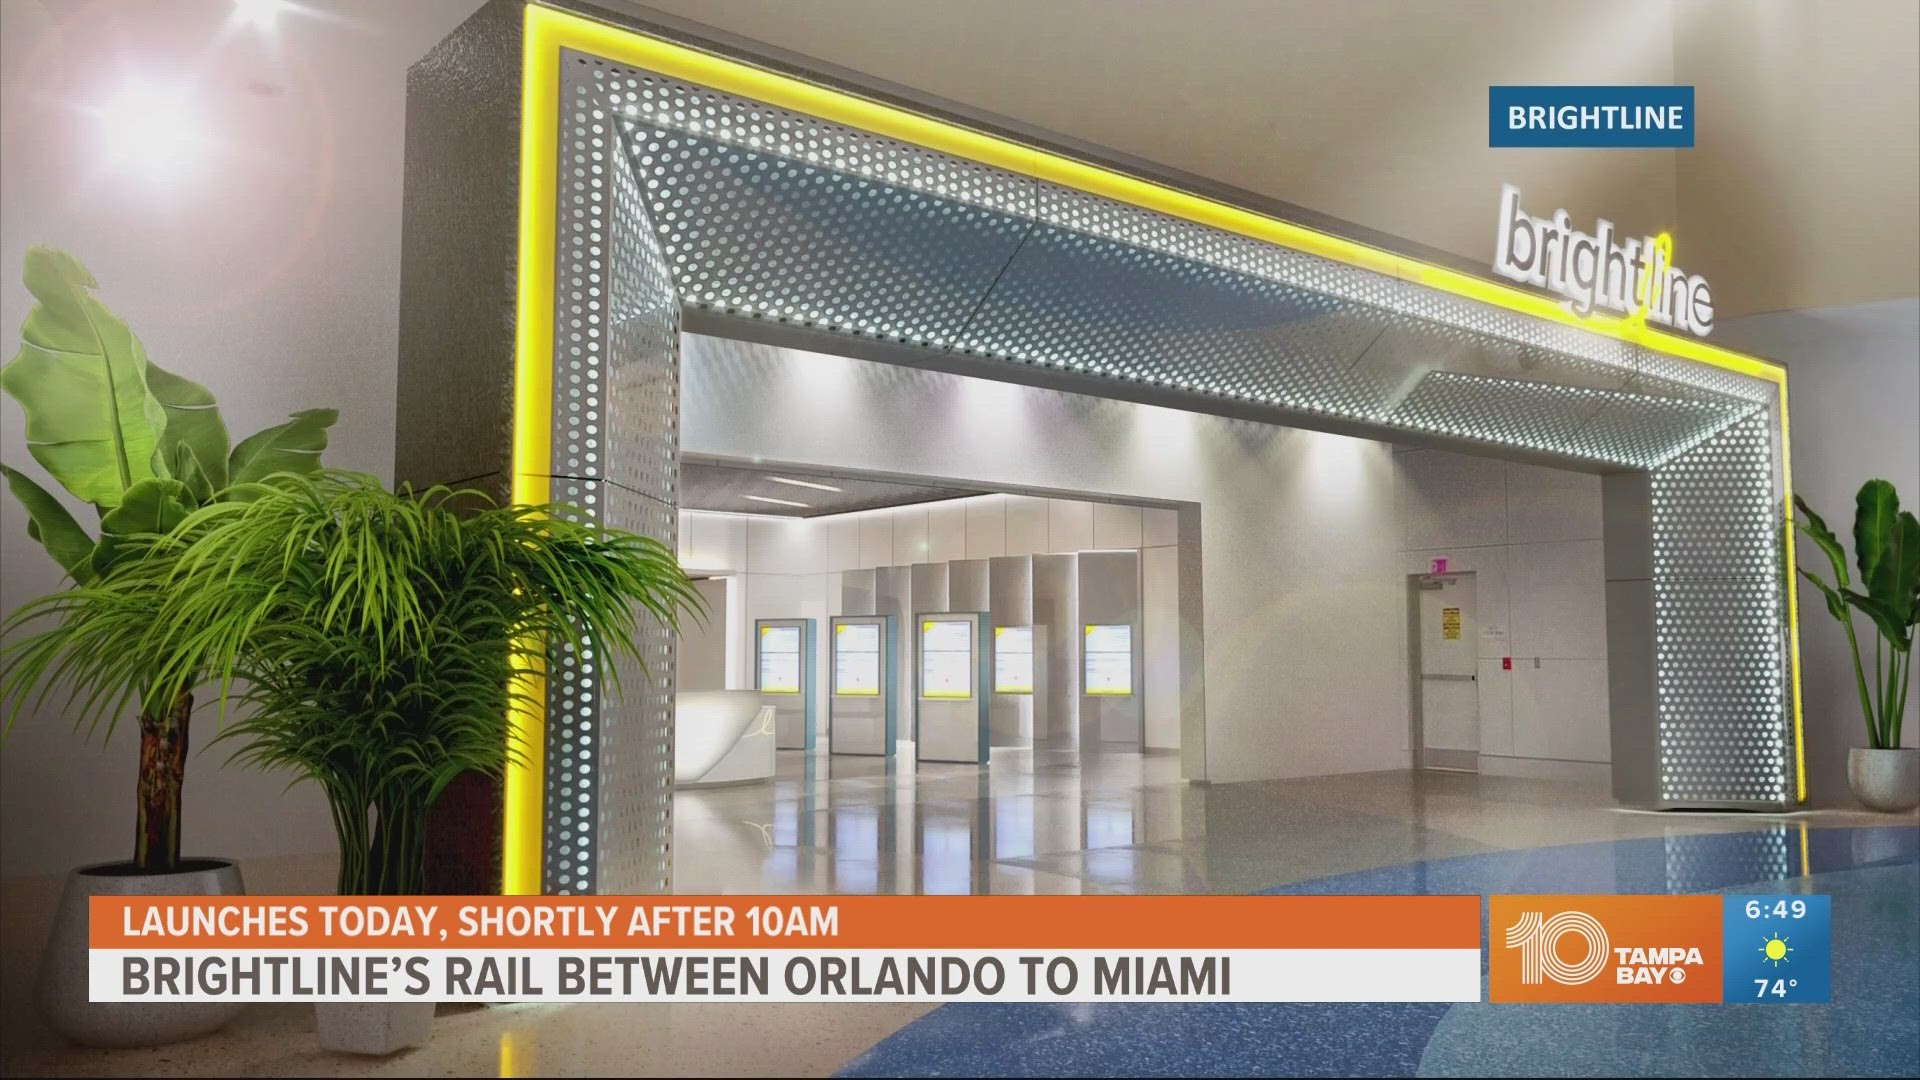 The privately owned passenger rail company is planning on a Tampa extension in the coming years connecting Tampa to Orlando.